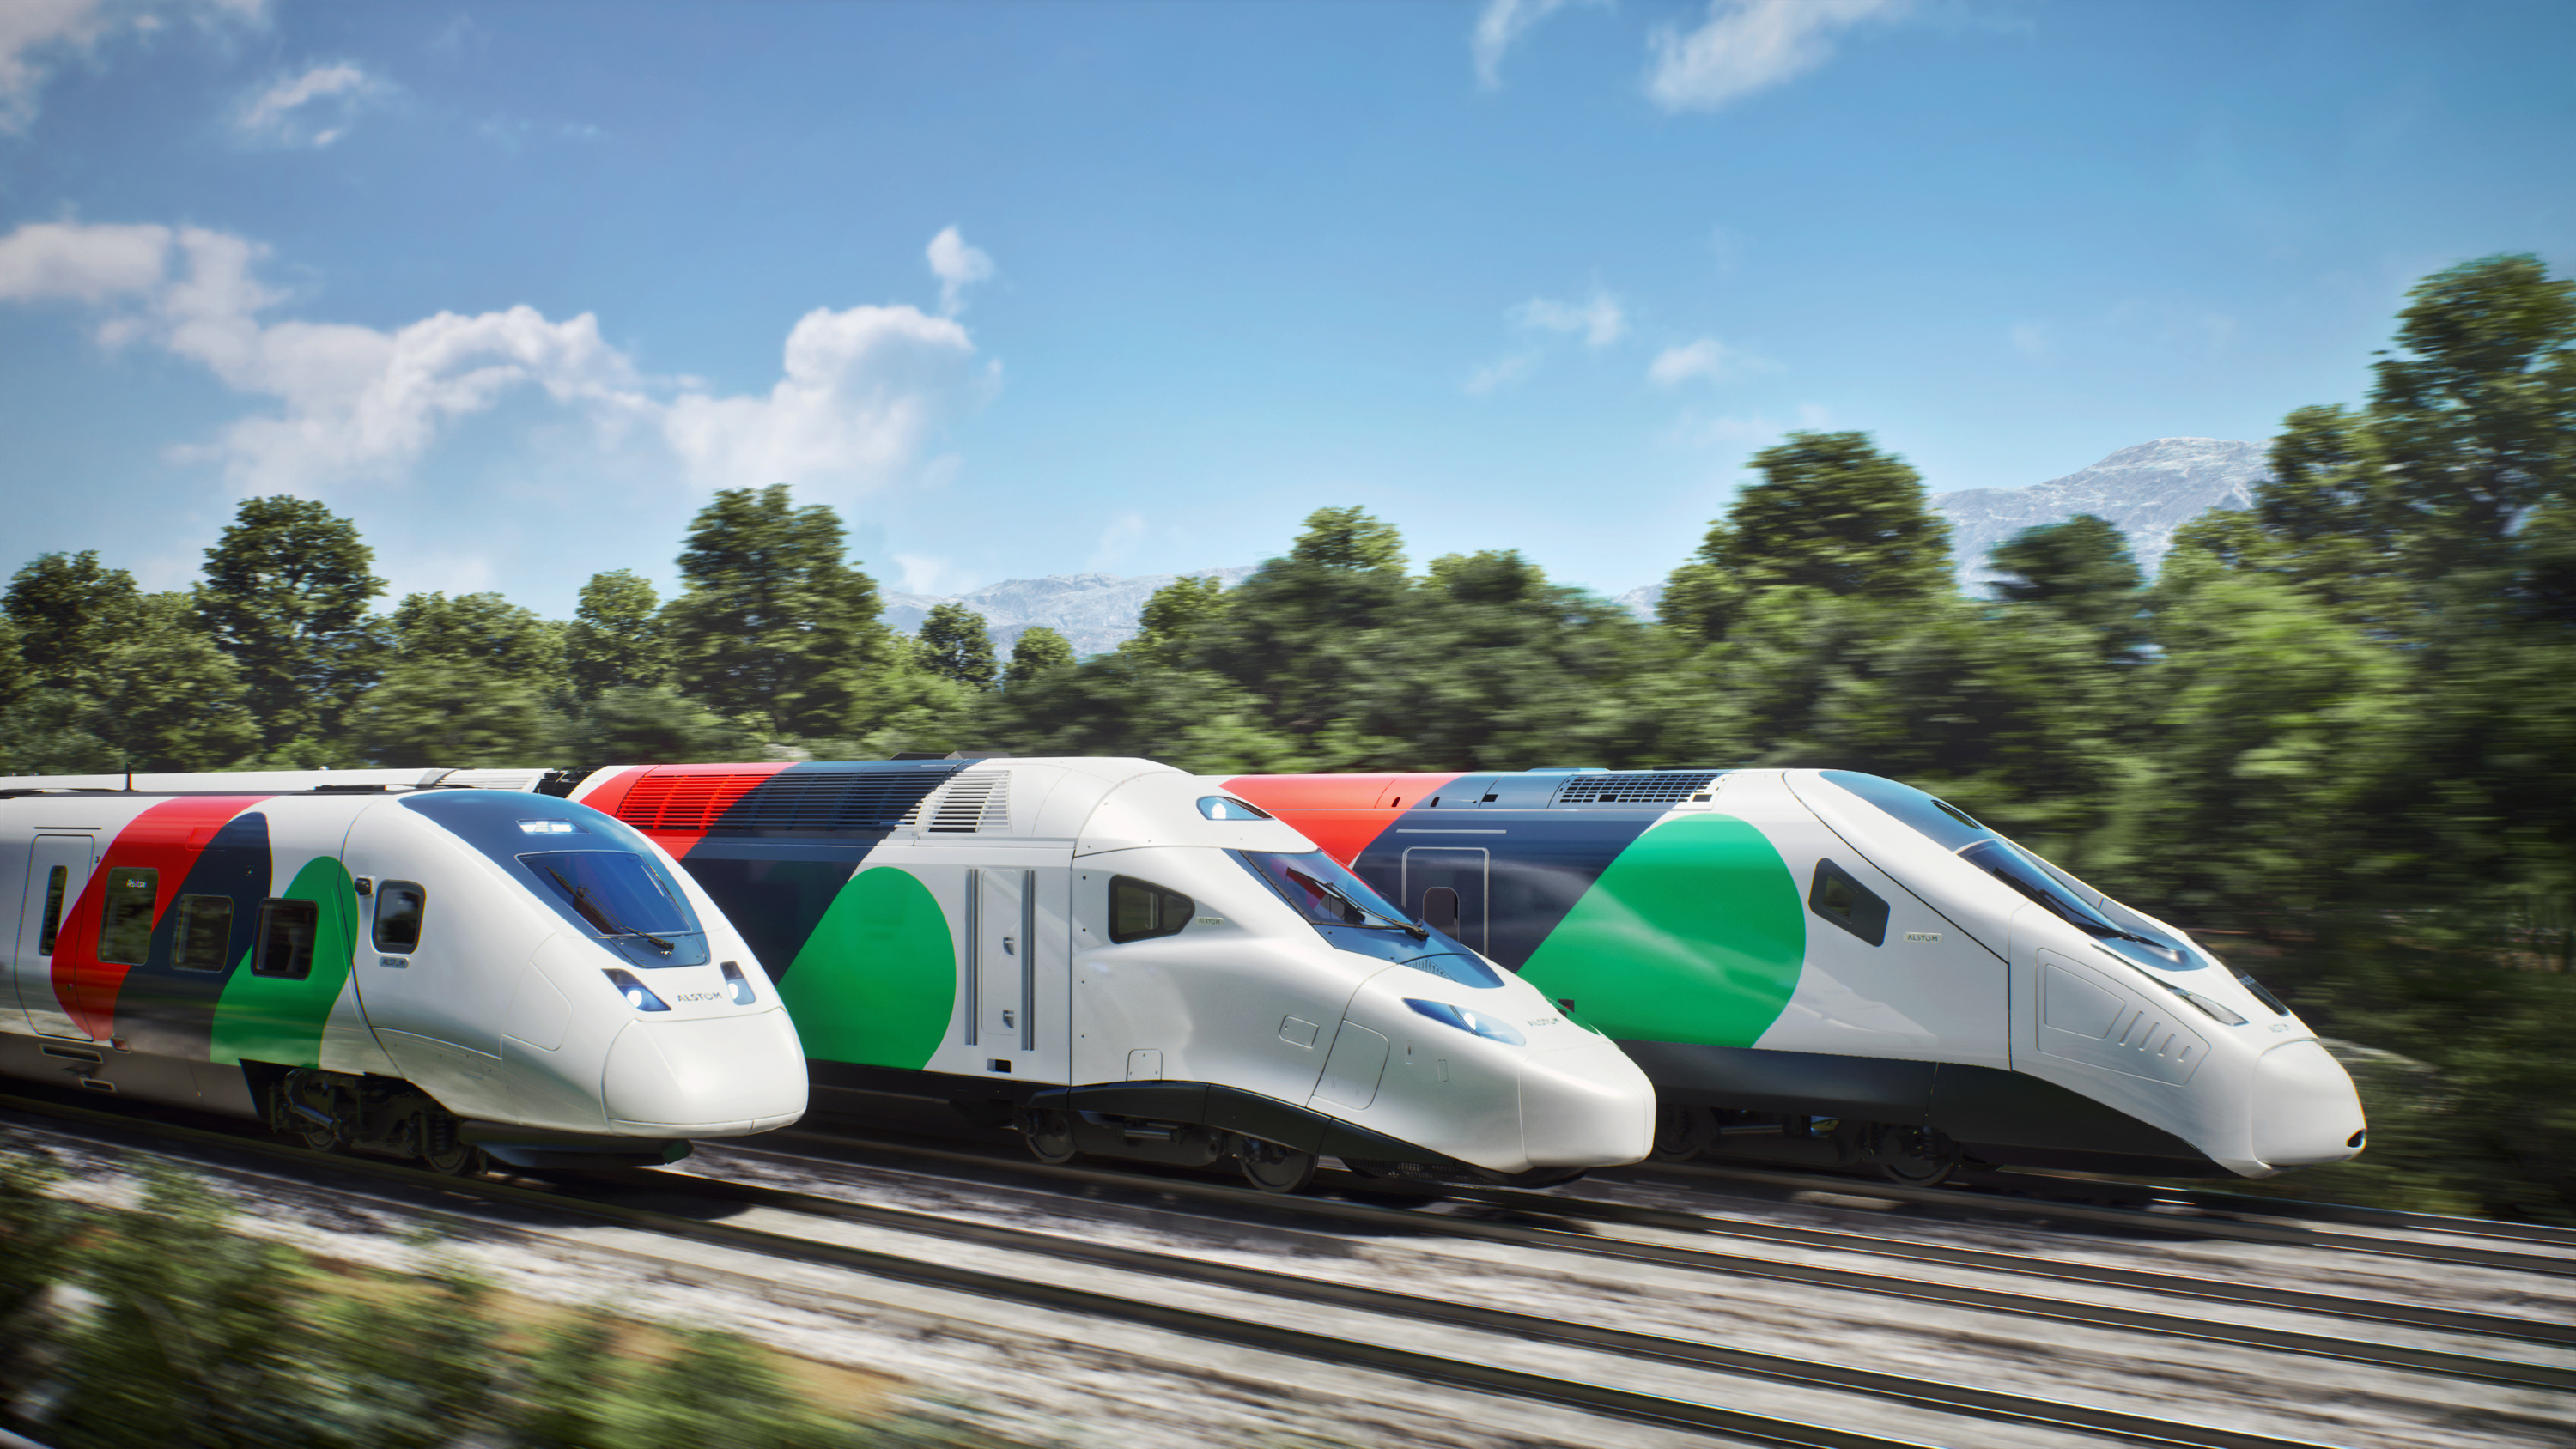 Avelia high-speed trains: The best way to travel fast